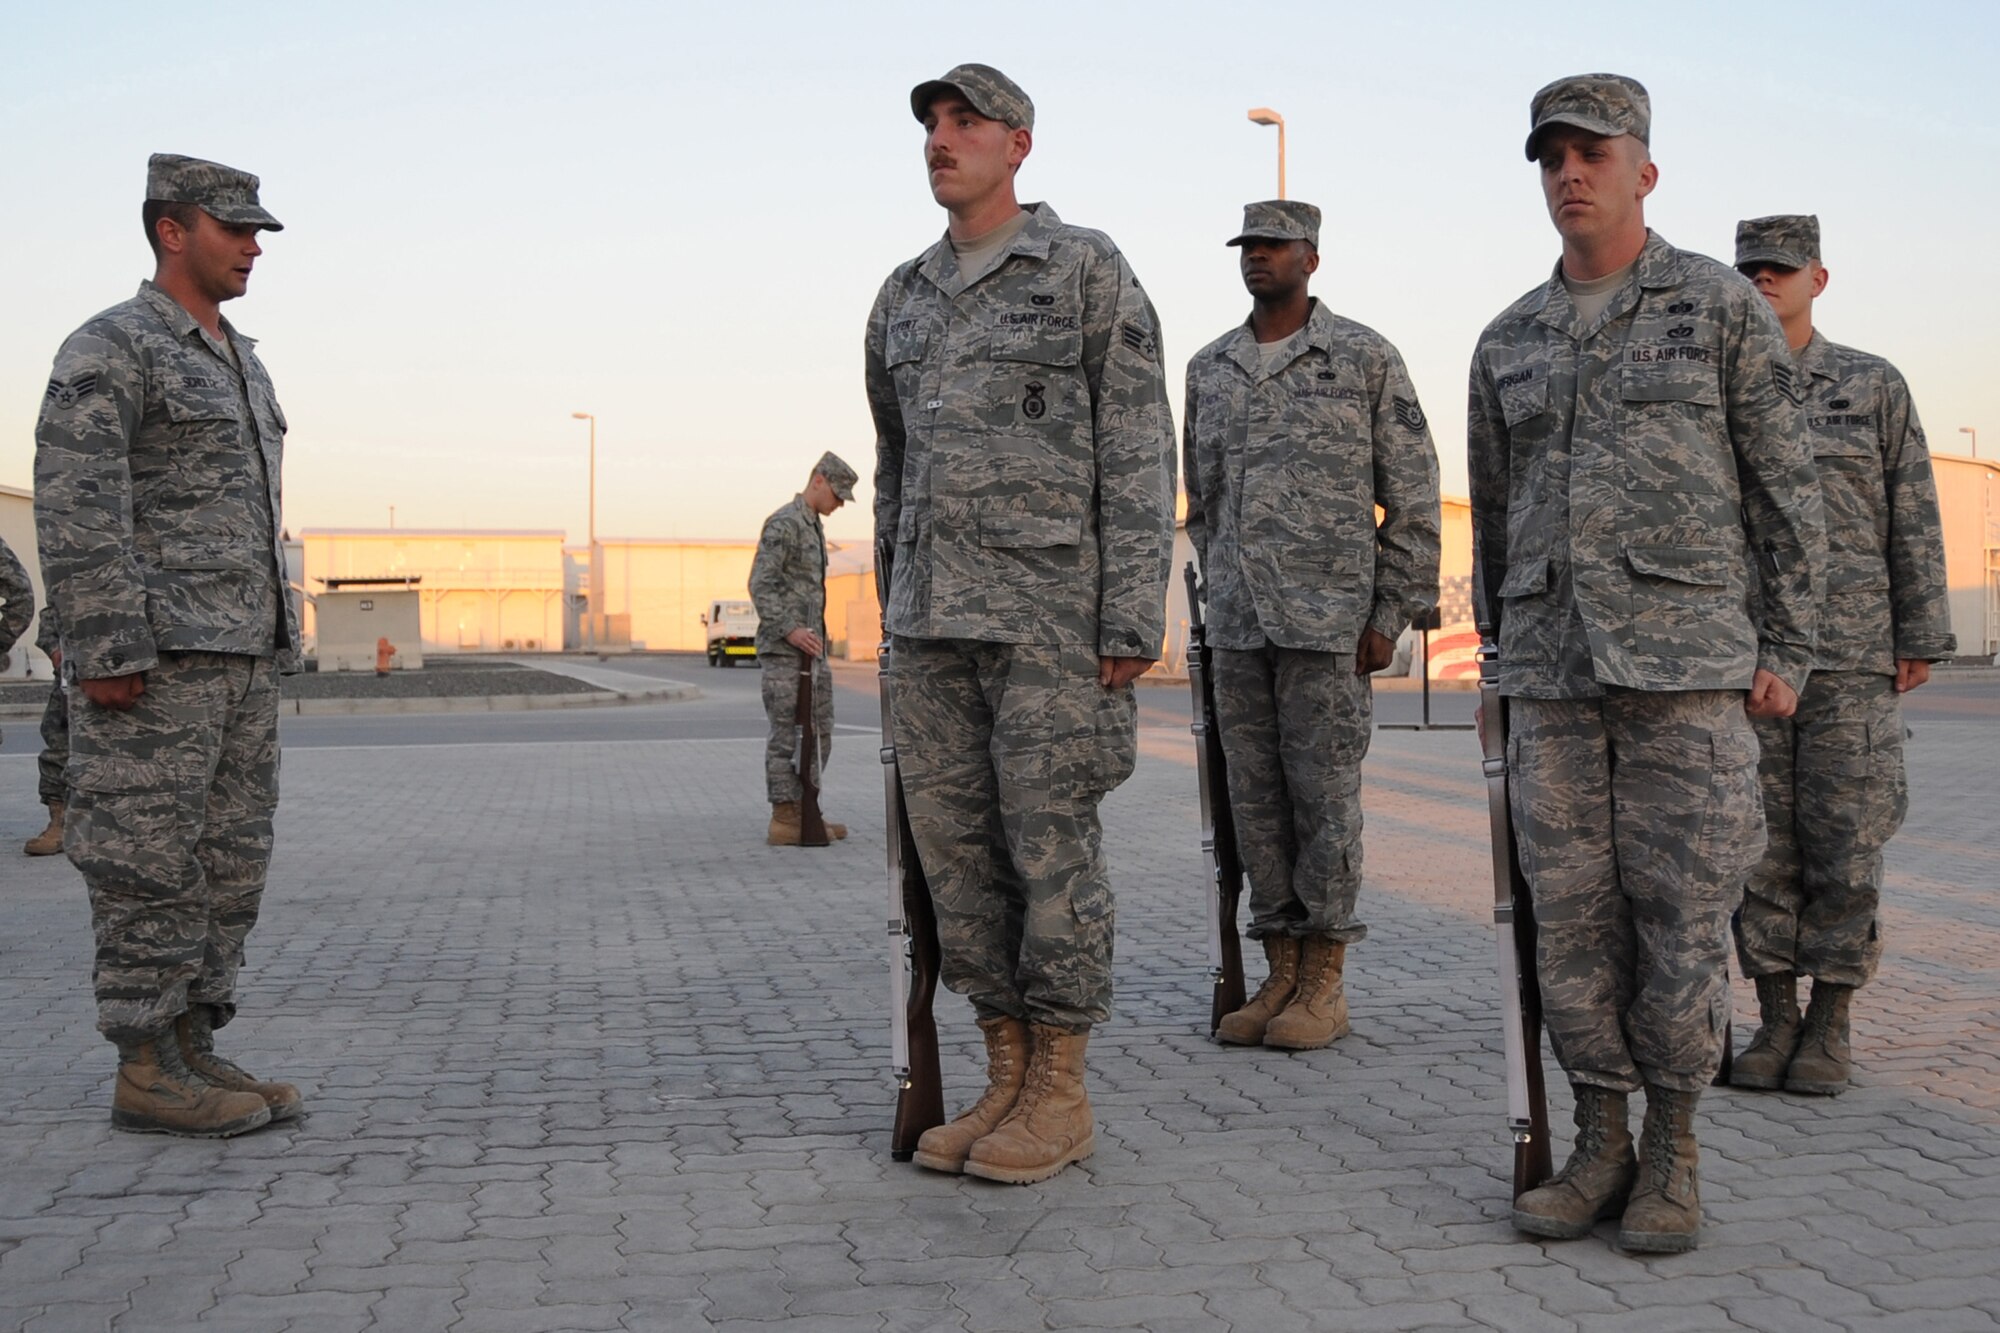 Members of the 380th Air Expeditionary Wing honor guard practice drill and ceremony procedures at an undisclosed location in Southwest Asia on Jan. 19, 2010.  The group is comprised of deployed Airmen that work, on average, 12 plus hours each day in their indivual work units and volunteer for the honor guard twice a week for several hours as well as performing drill and ceremony at official functions throughout the base. (U.S. Air Force photo/Senior Airman Jenifer H. Calhoun/Released)
